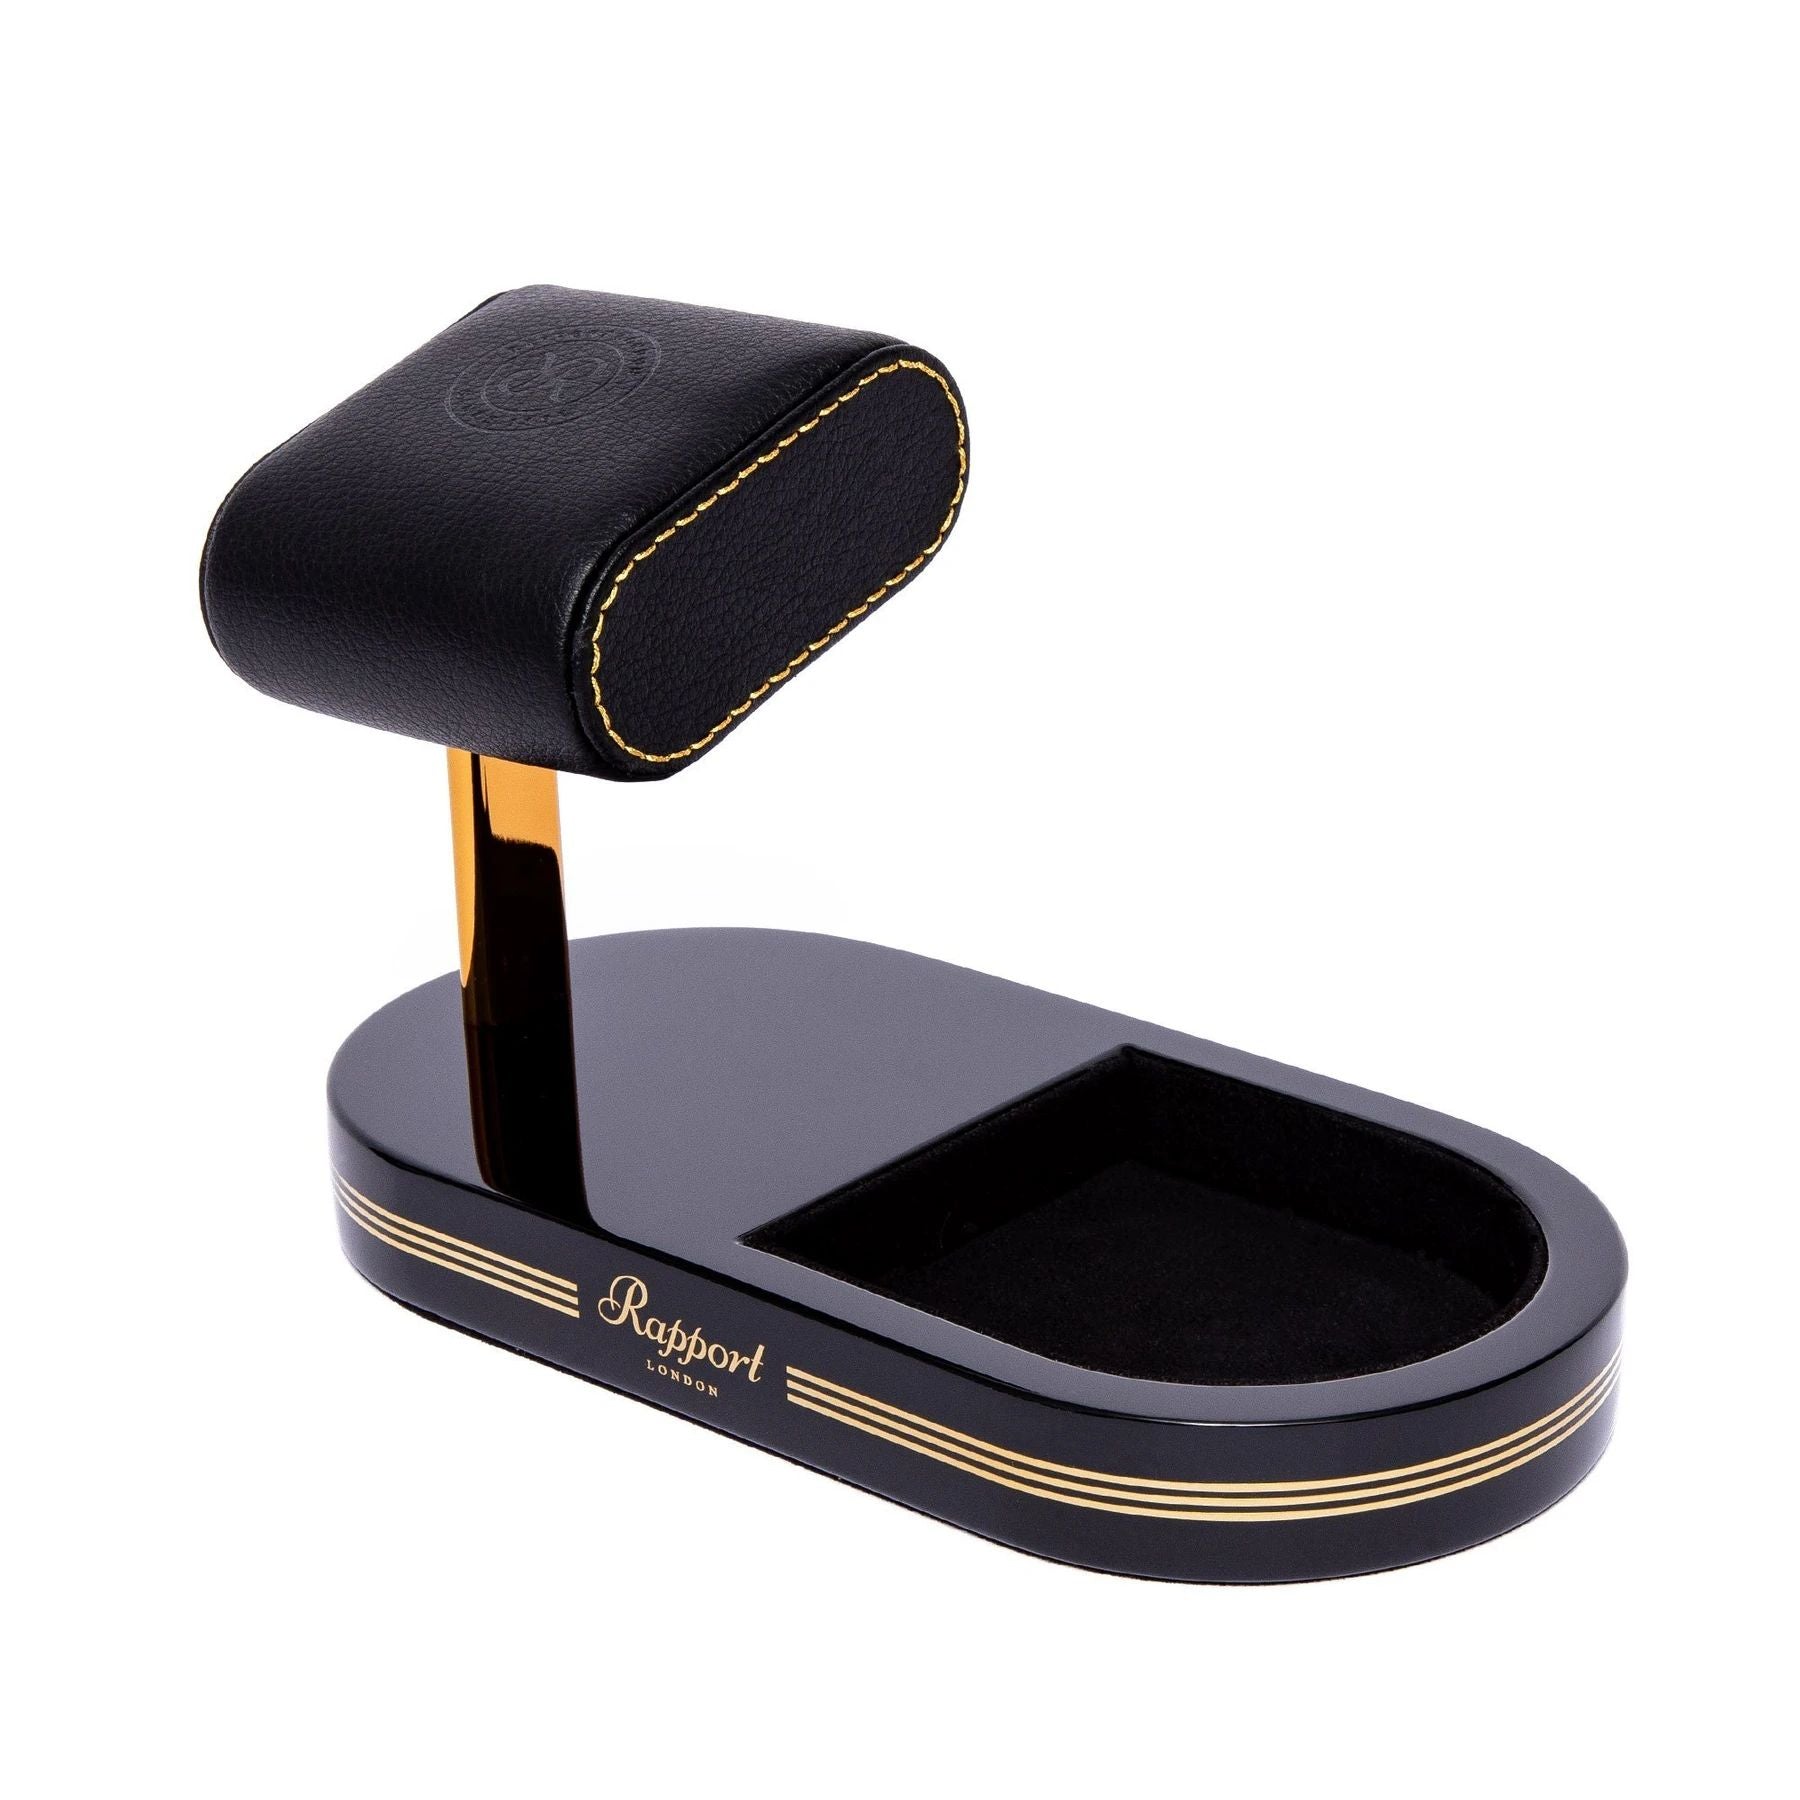 Formula Watch Stand With Tray - Black Gold by  Rapport London |  Time Keeper.